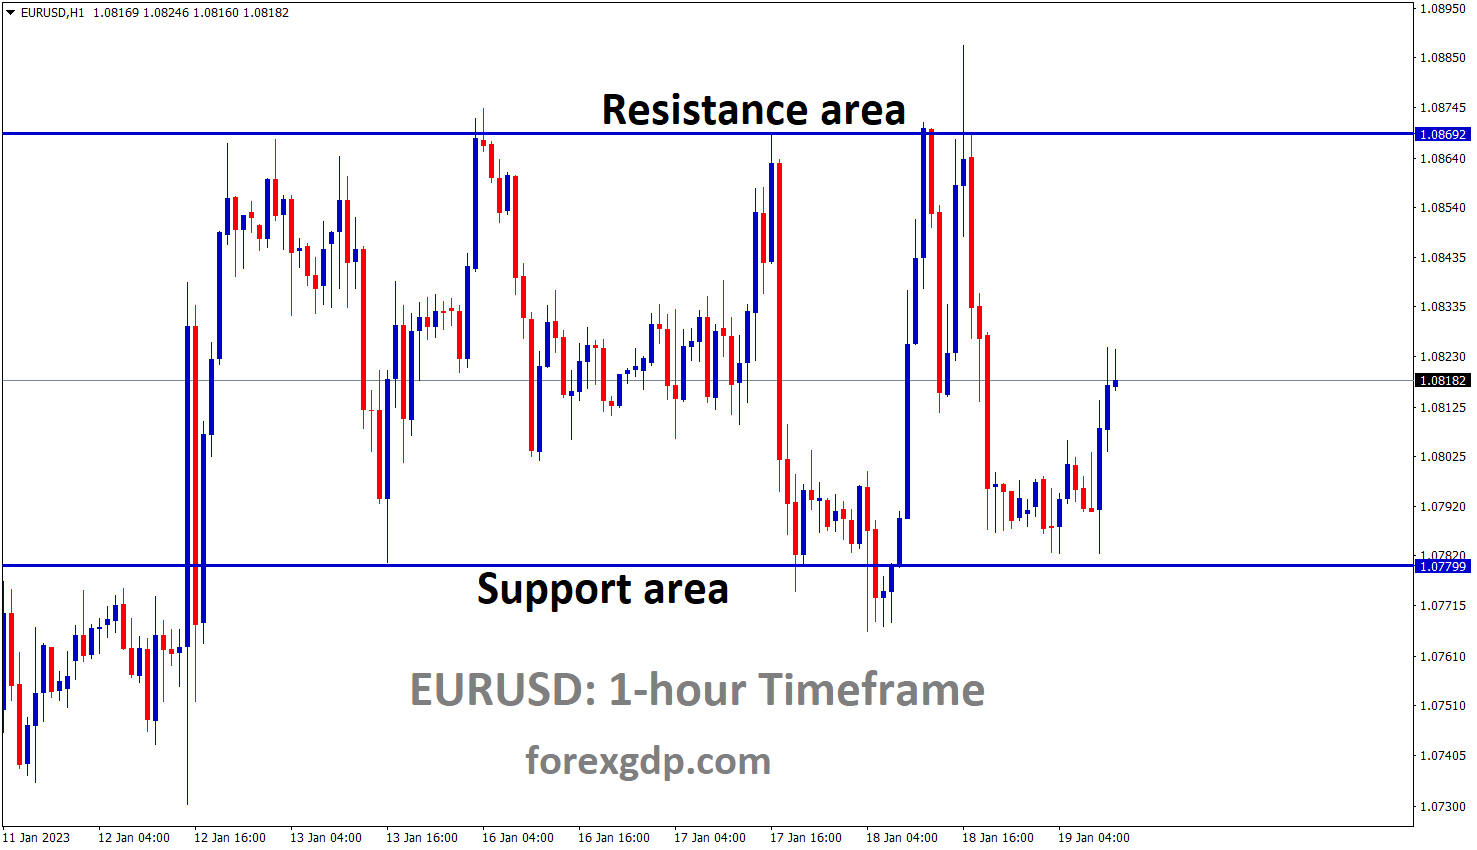 EURUSD is moving in the Box pattern and the market has rebounded from the horizontal support area of the pattern